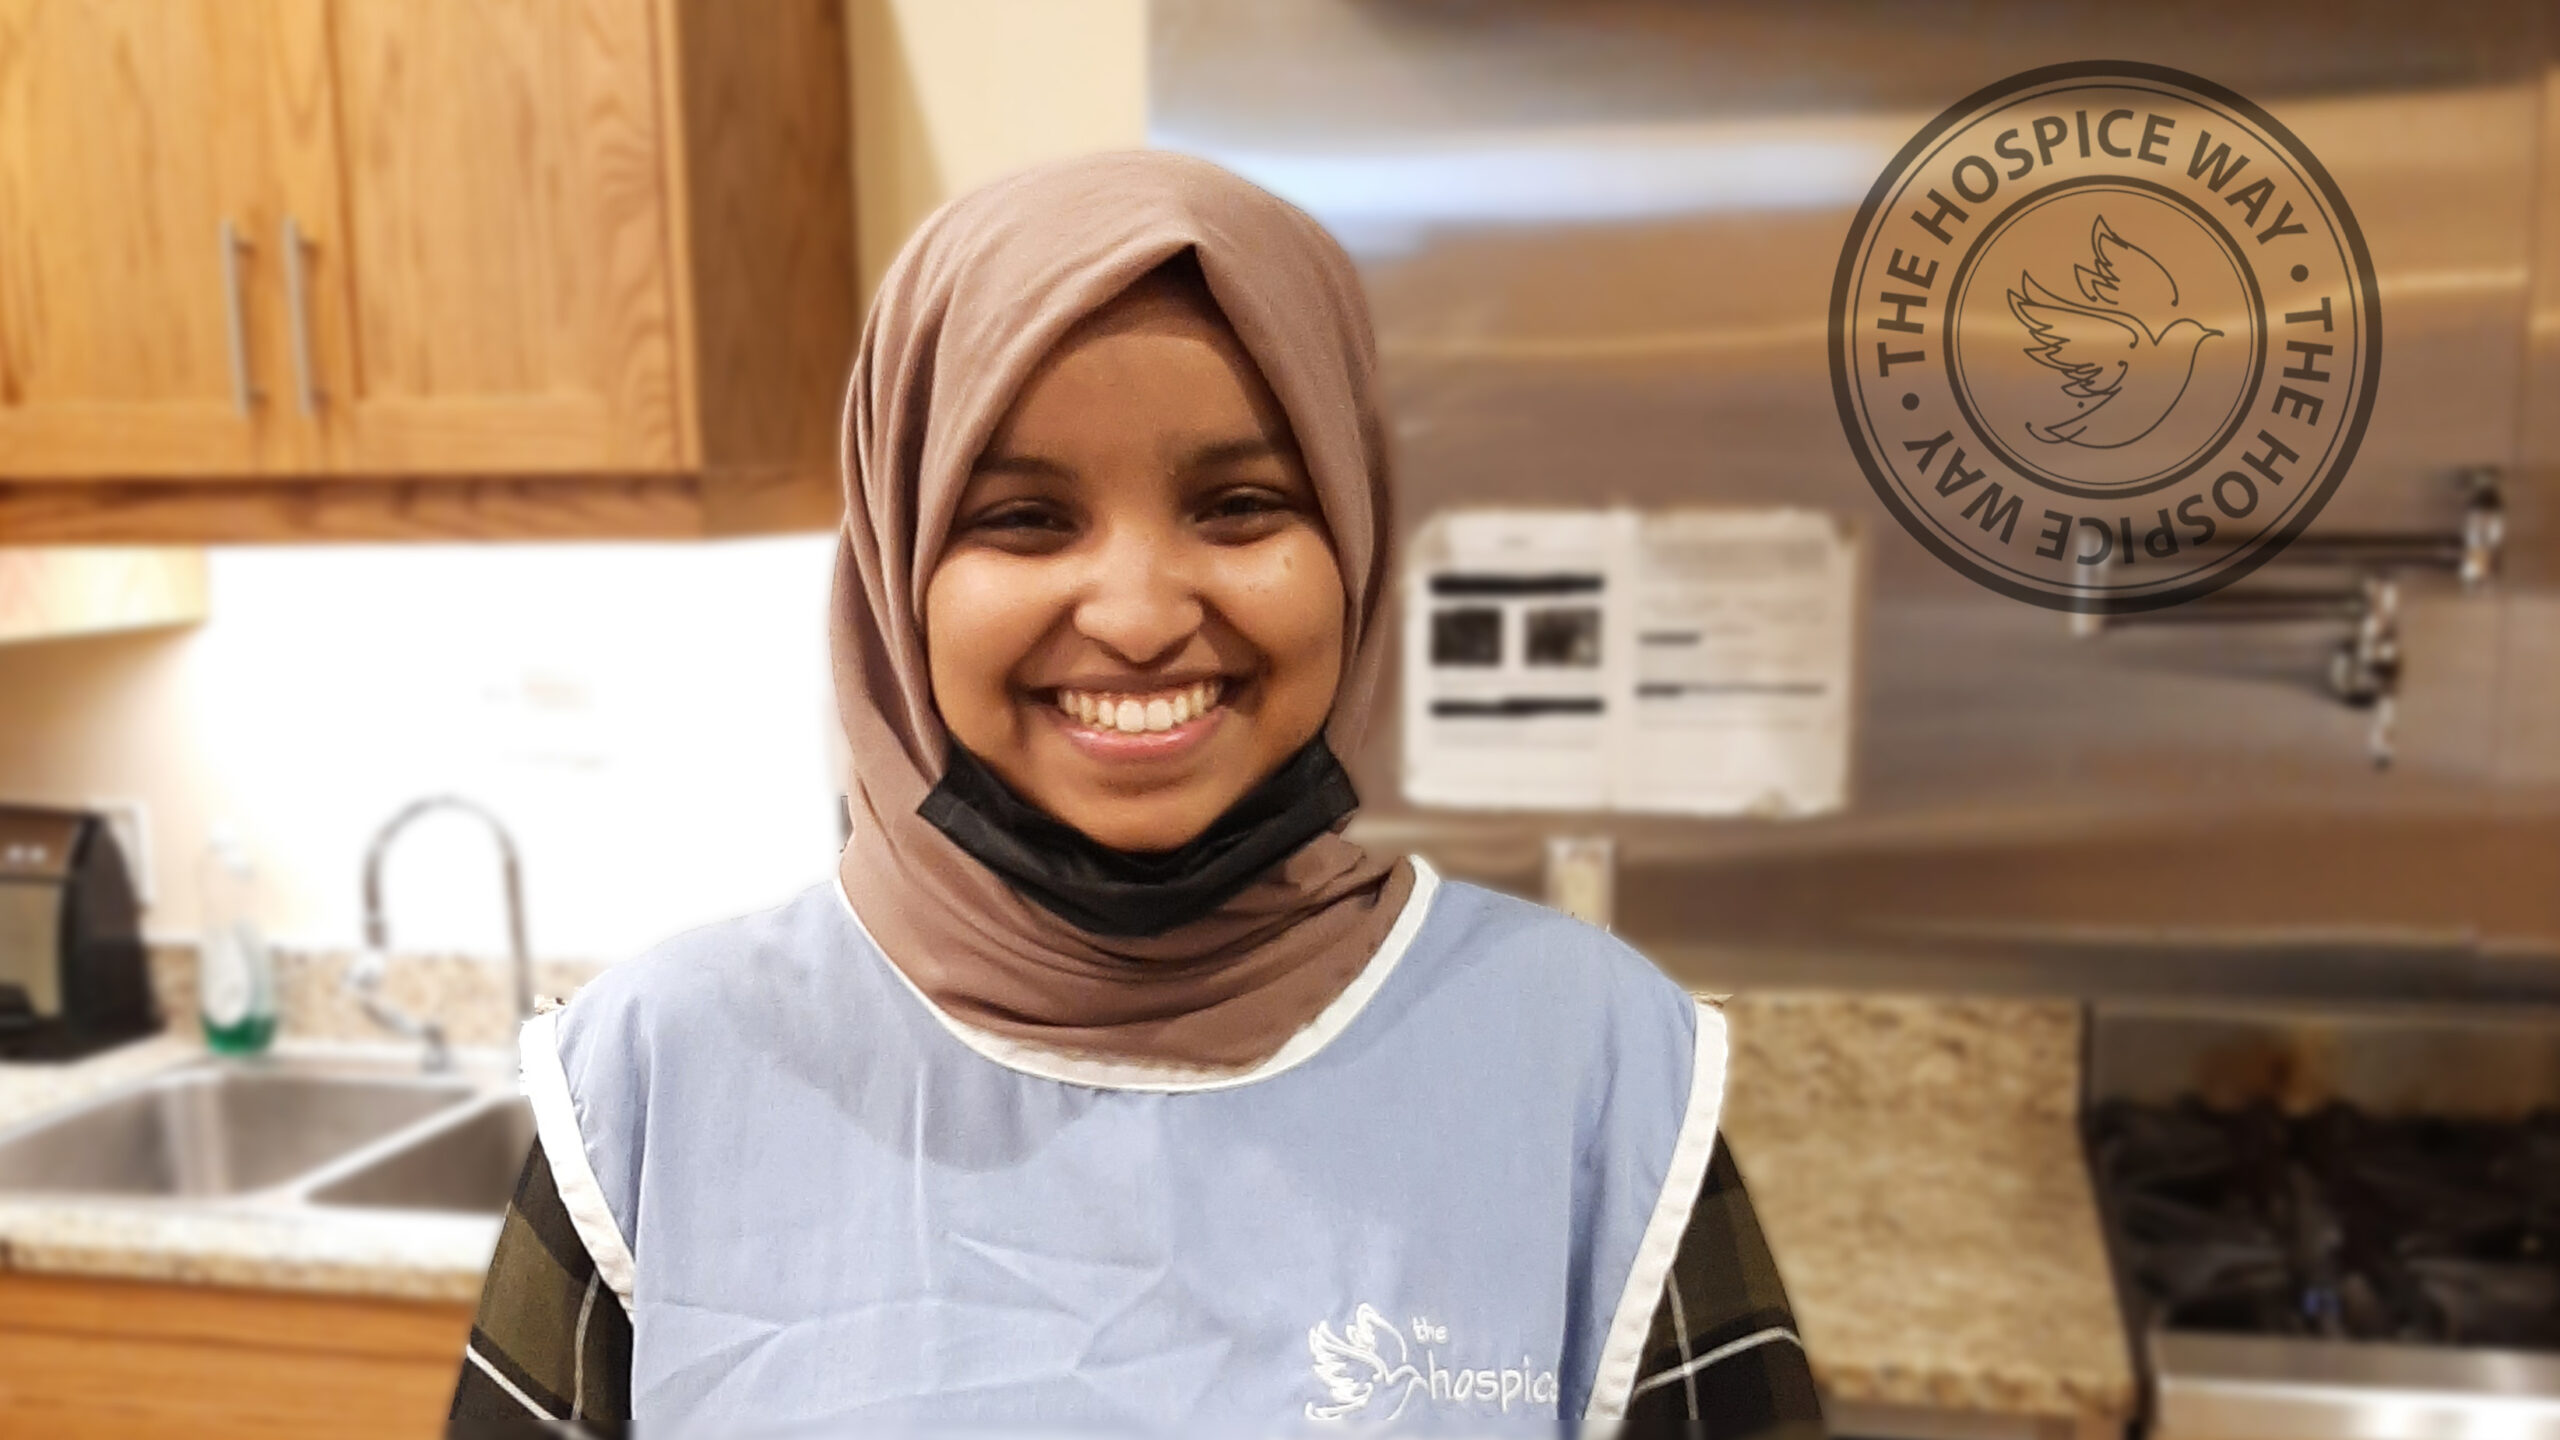 Halima volunteers in the kitchen our Windsor Residence